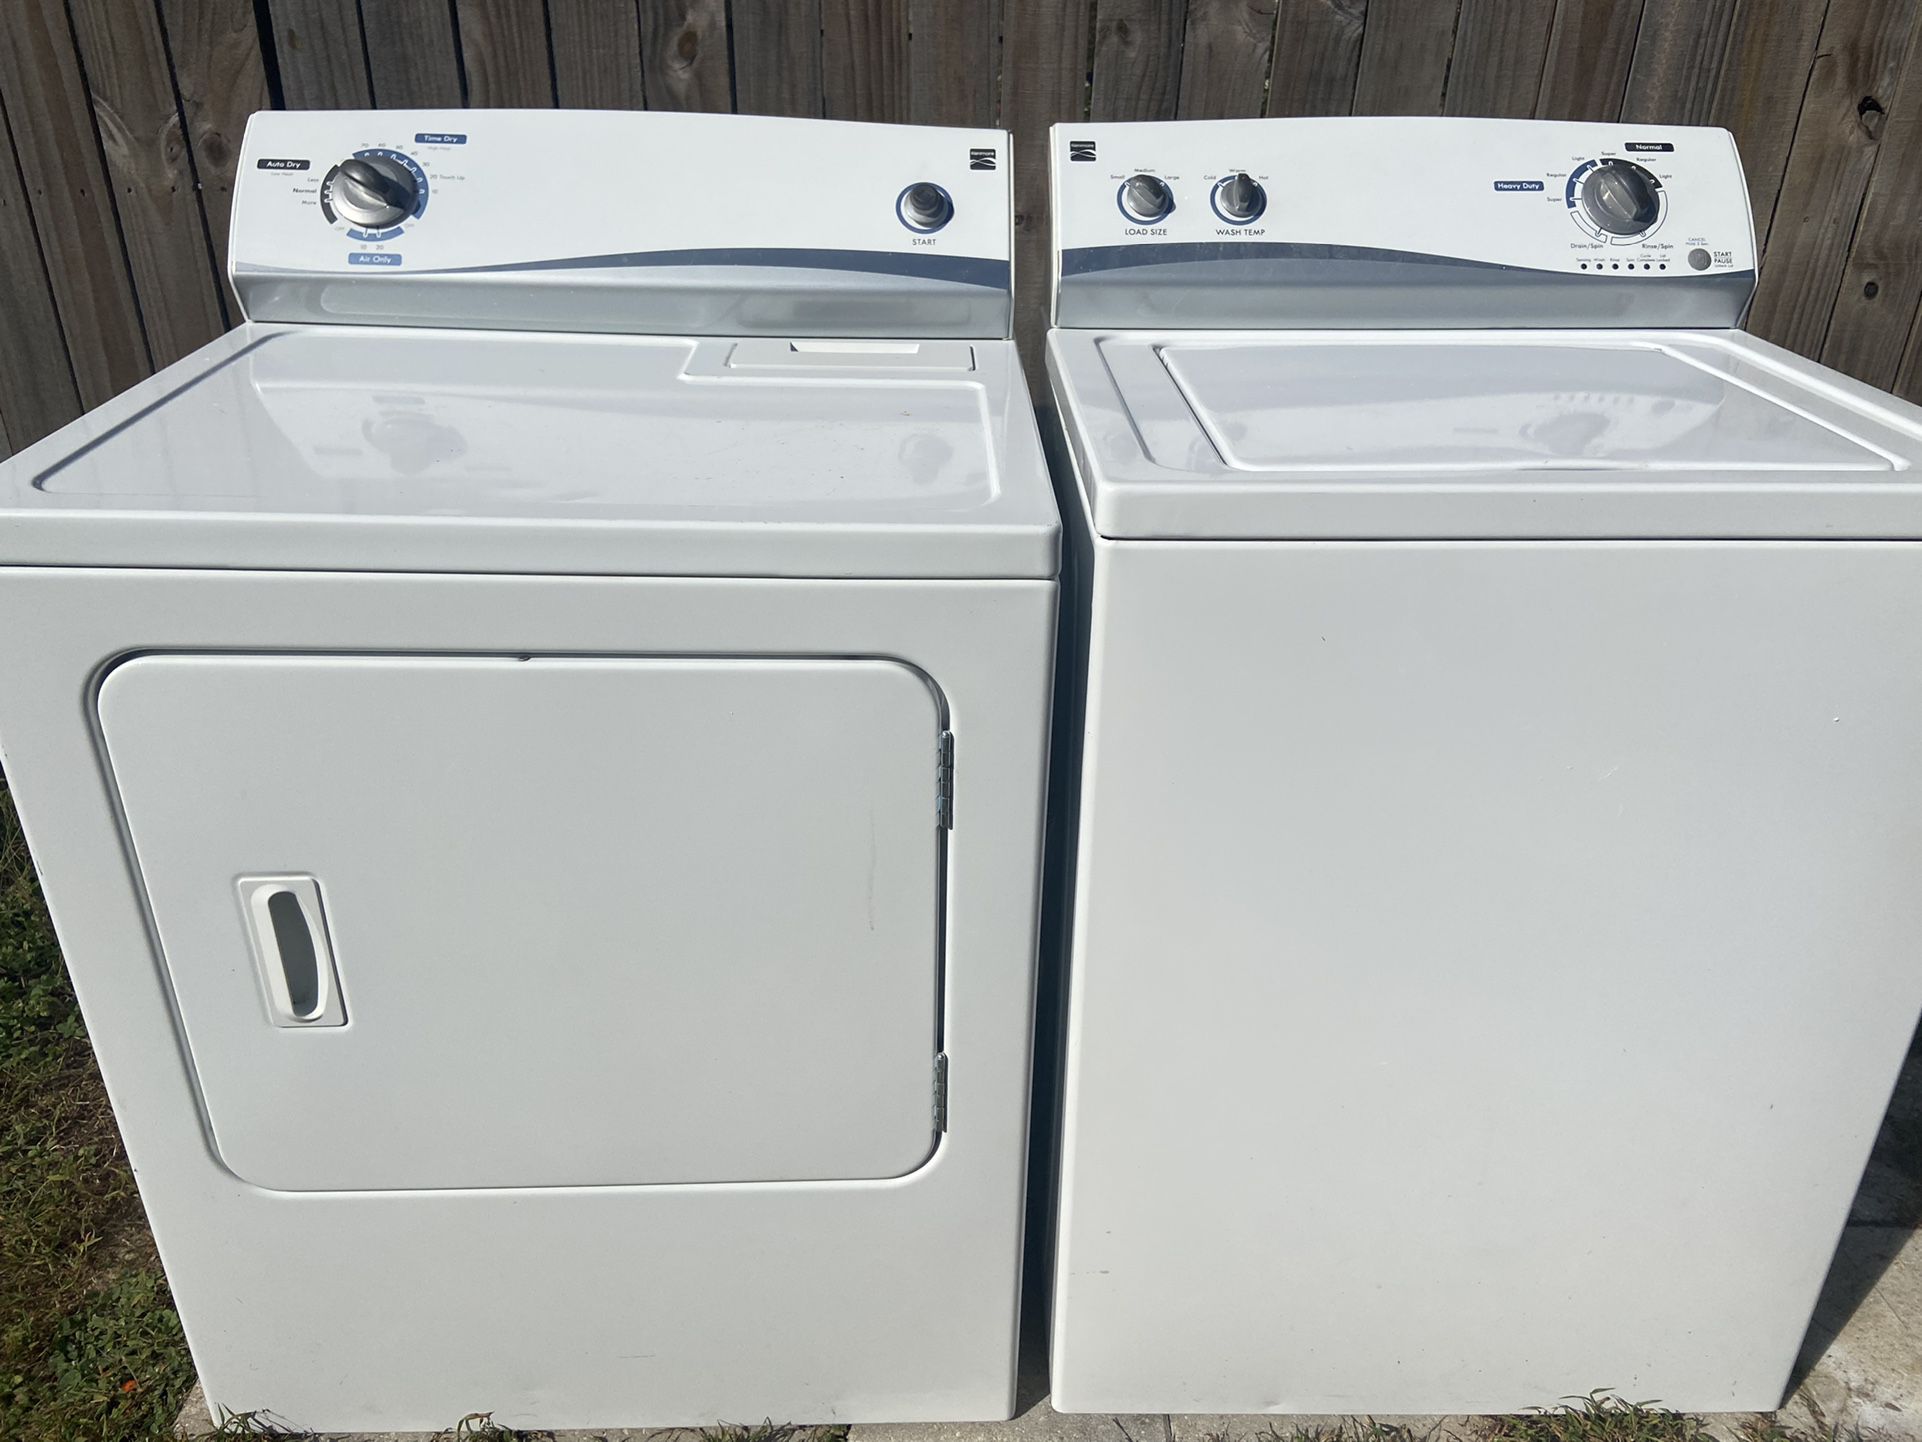 Matching Kenmore Washer And Dryer Set 